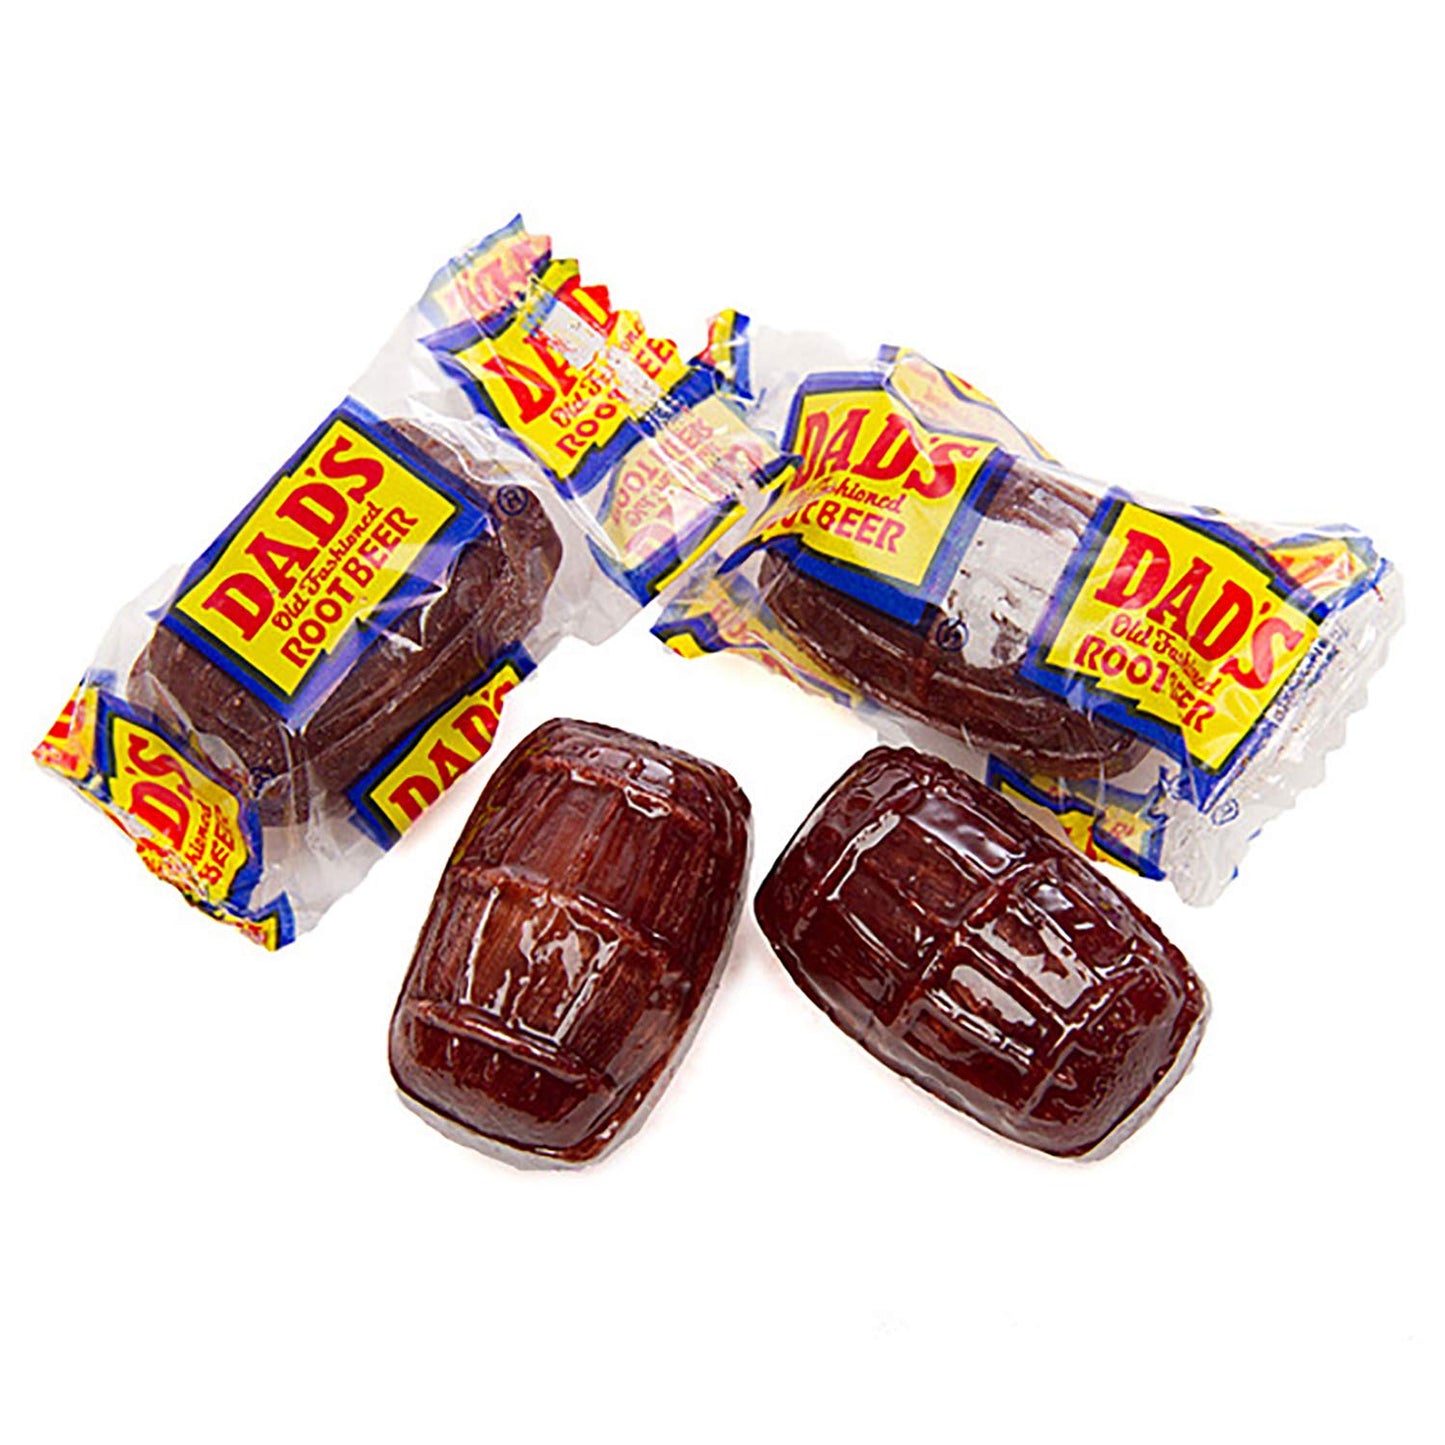 Dad's Root Beer Barrels - Washburn Hard Old Fashioned Candy Individually Wrapped, 4 LB Bulk Candy